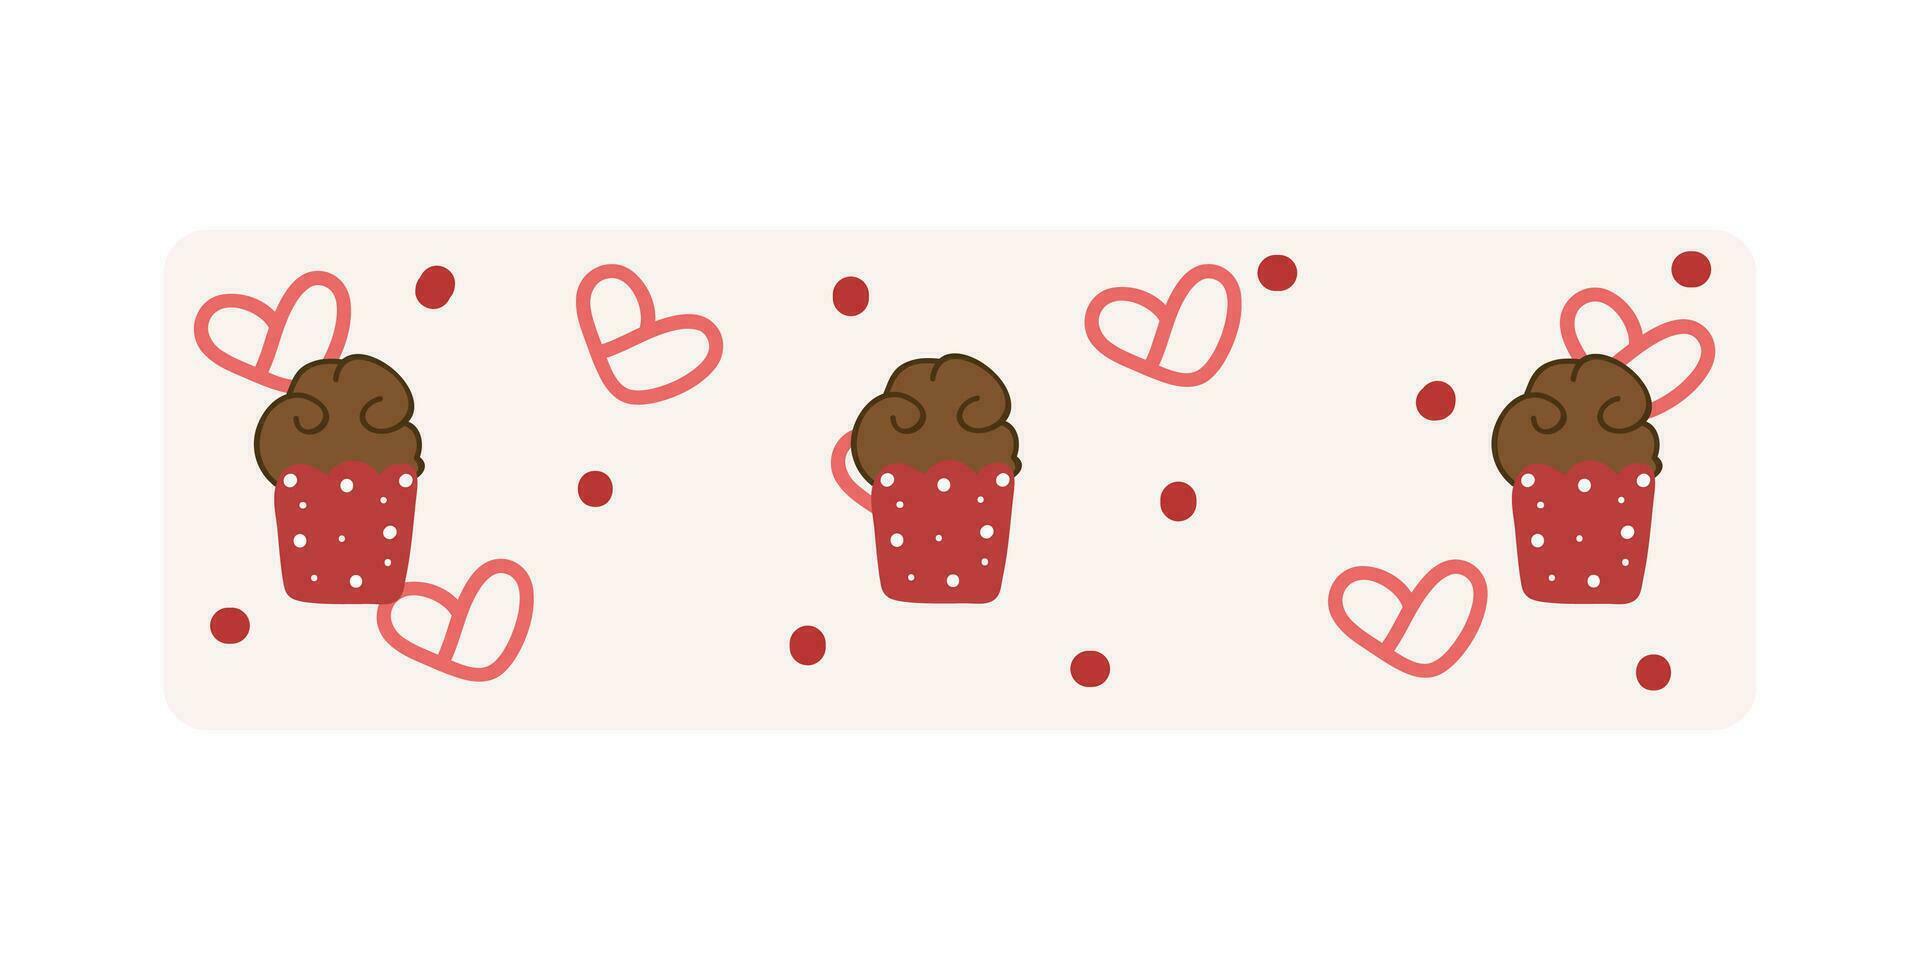 Cute Valentines day washi tape strips stickers. Stationary scrapbooking set. Valentines Day decoration and washi tapes. Vector illustration.